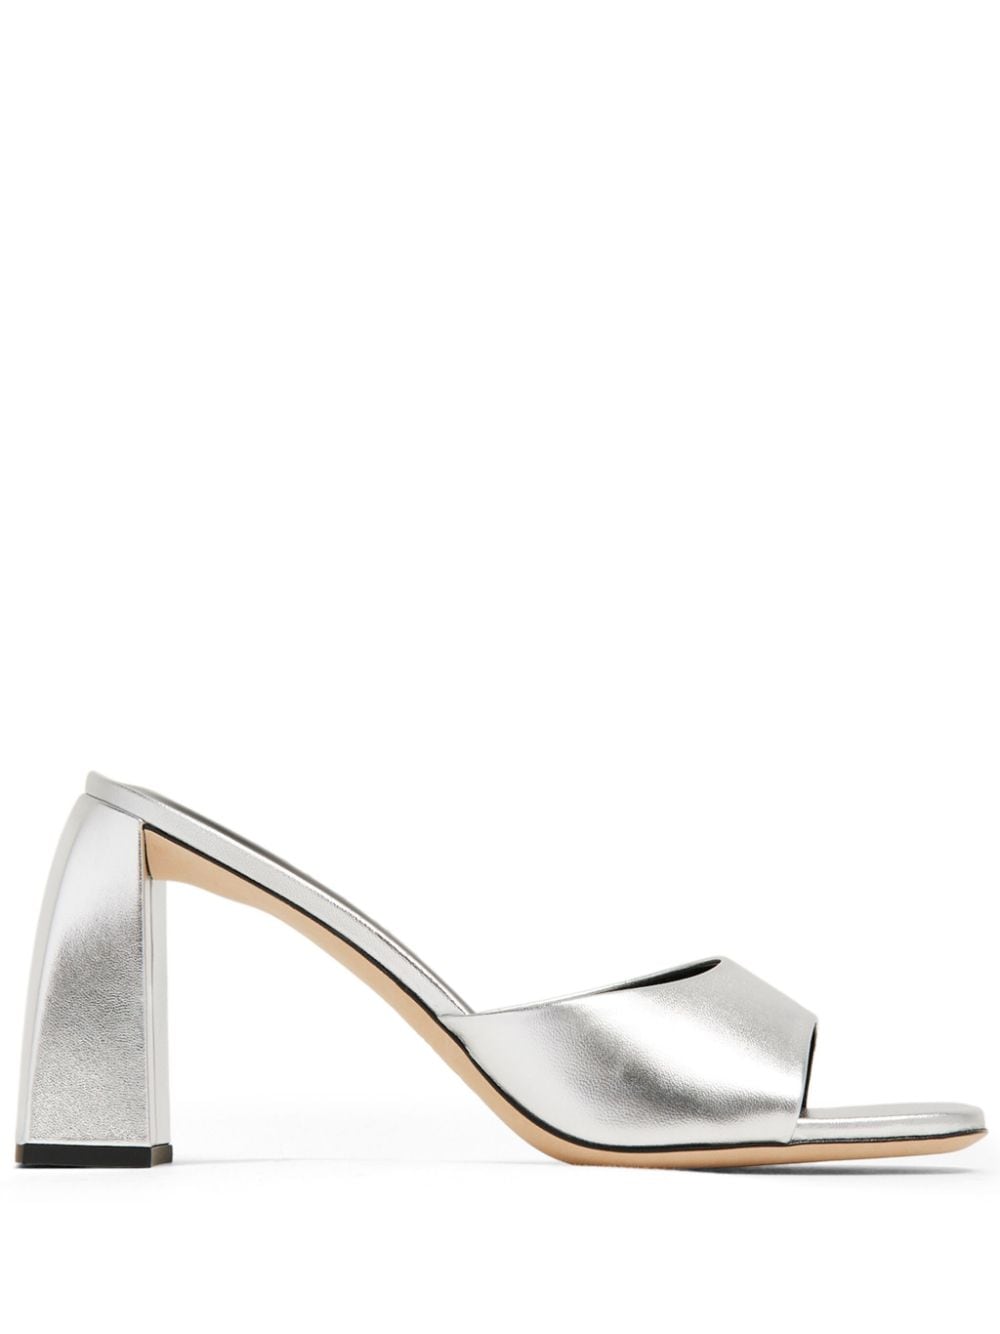 BY FAR Michele 100mm metallic leather mules - Silber